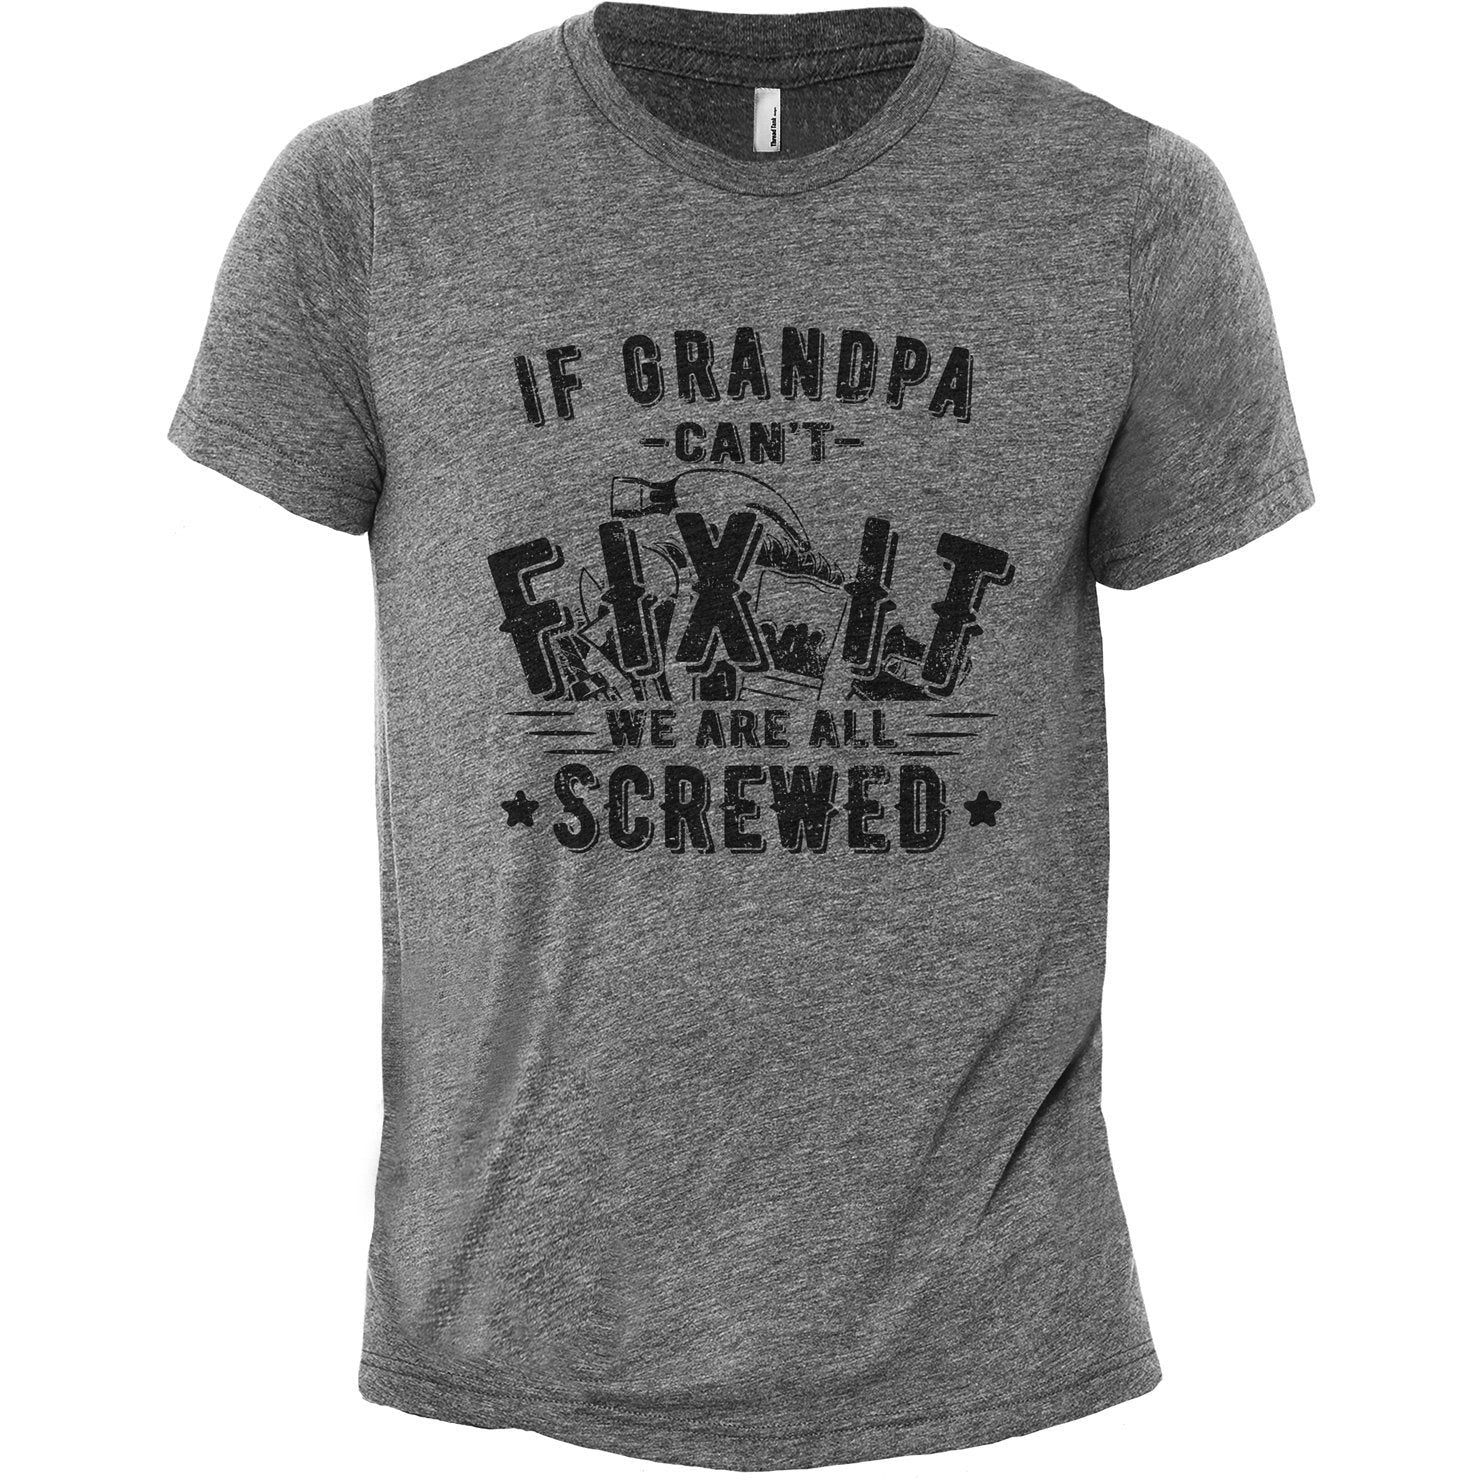 If Grandpa Can't Fix It We Are All Screwed